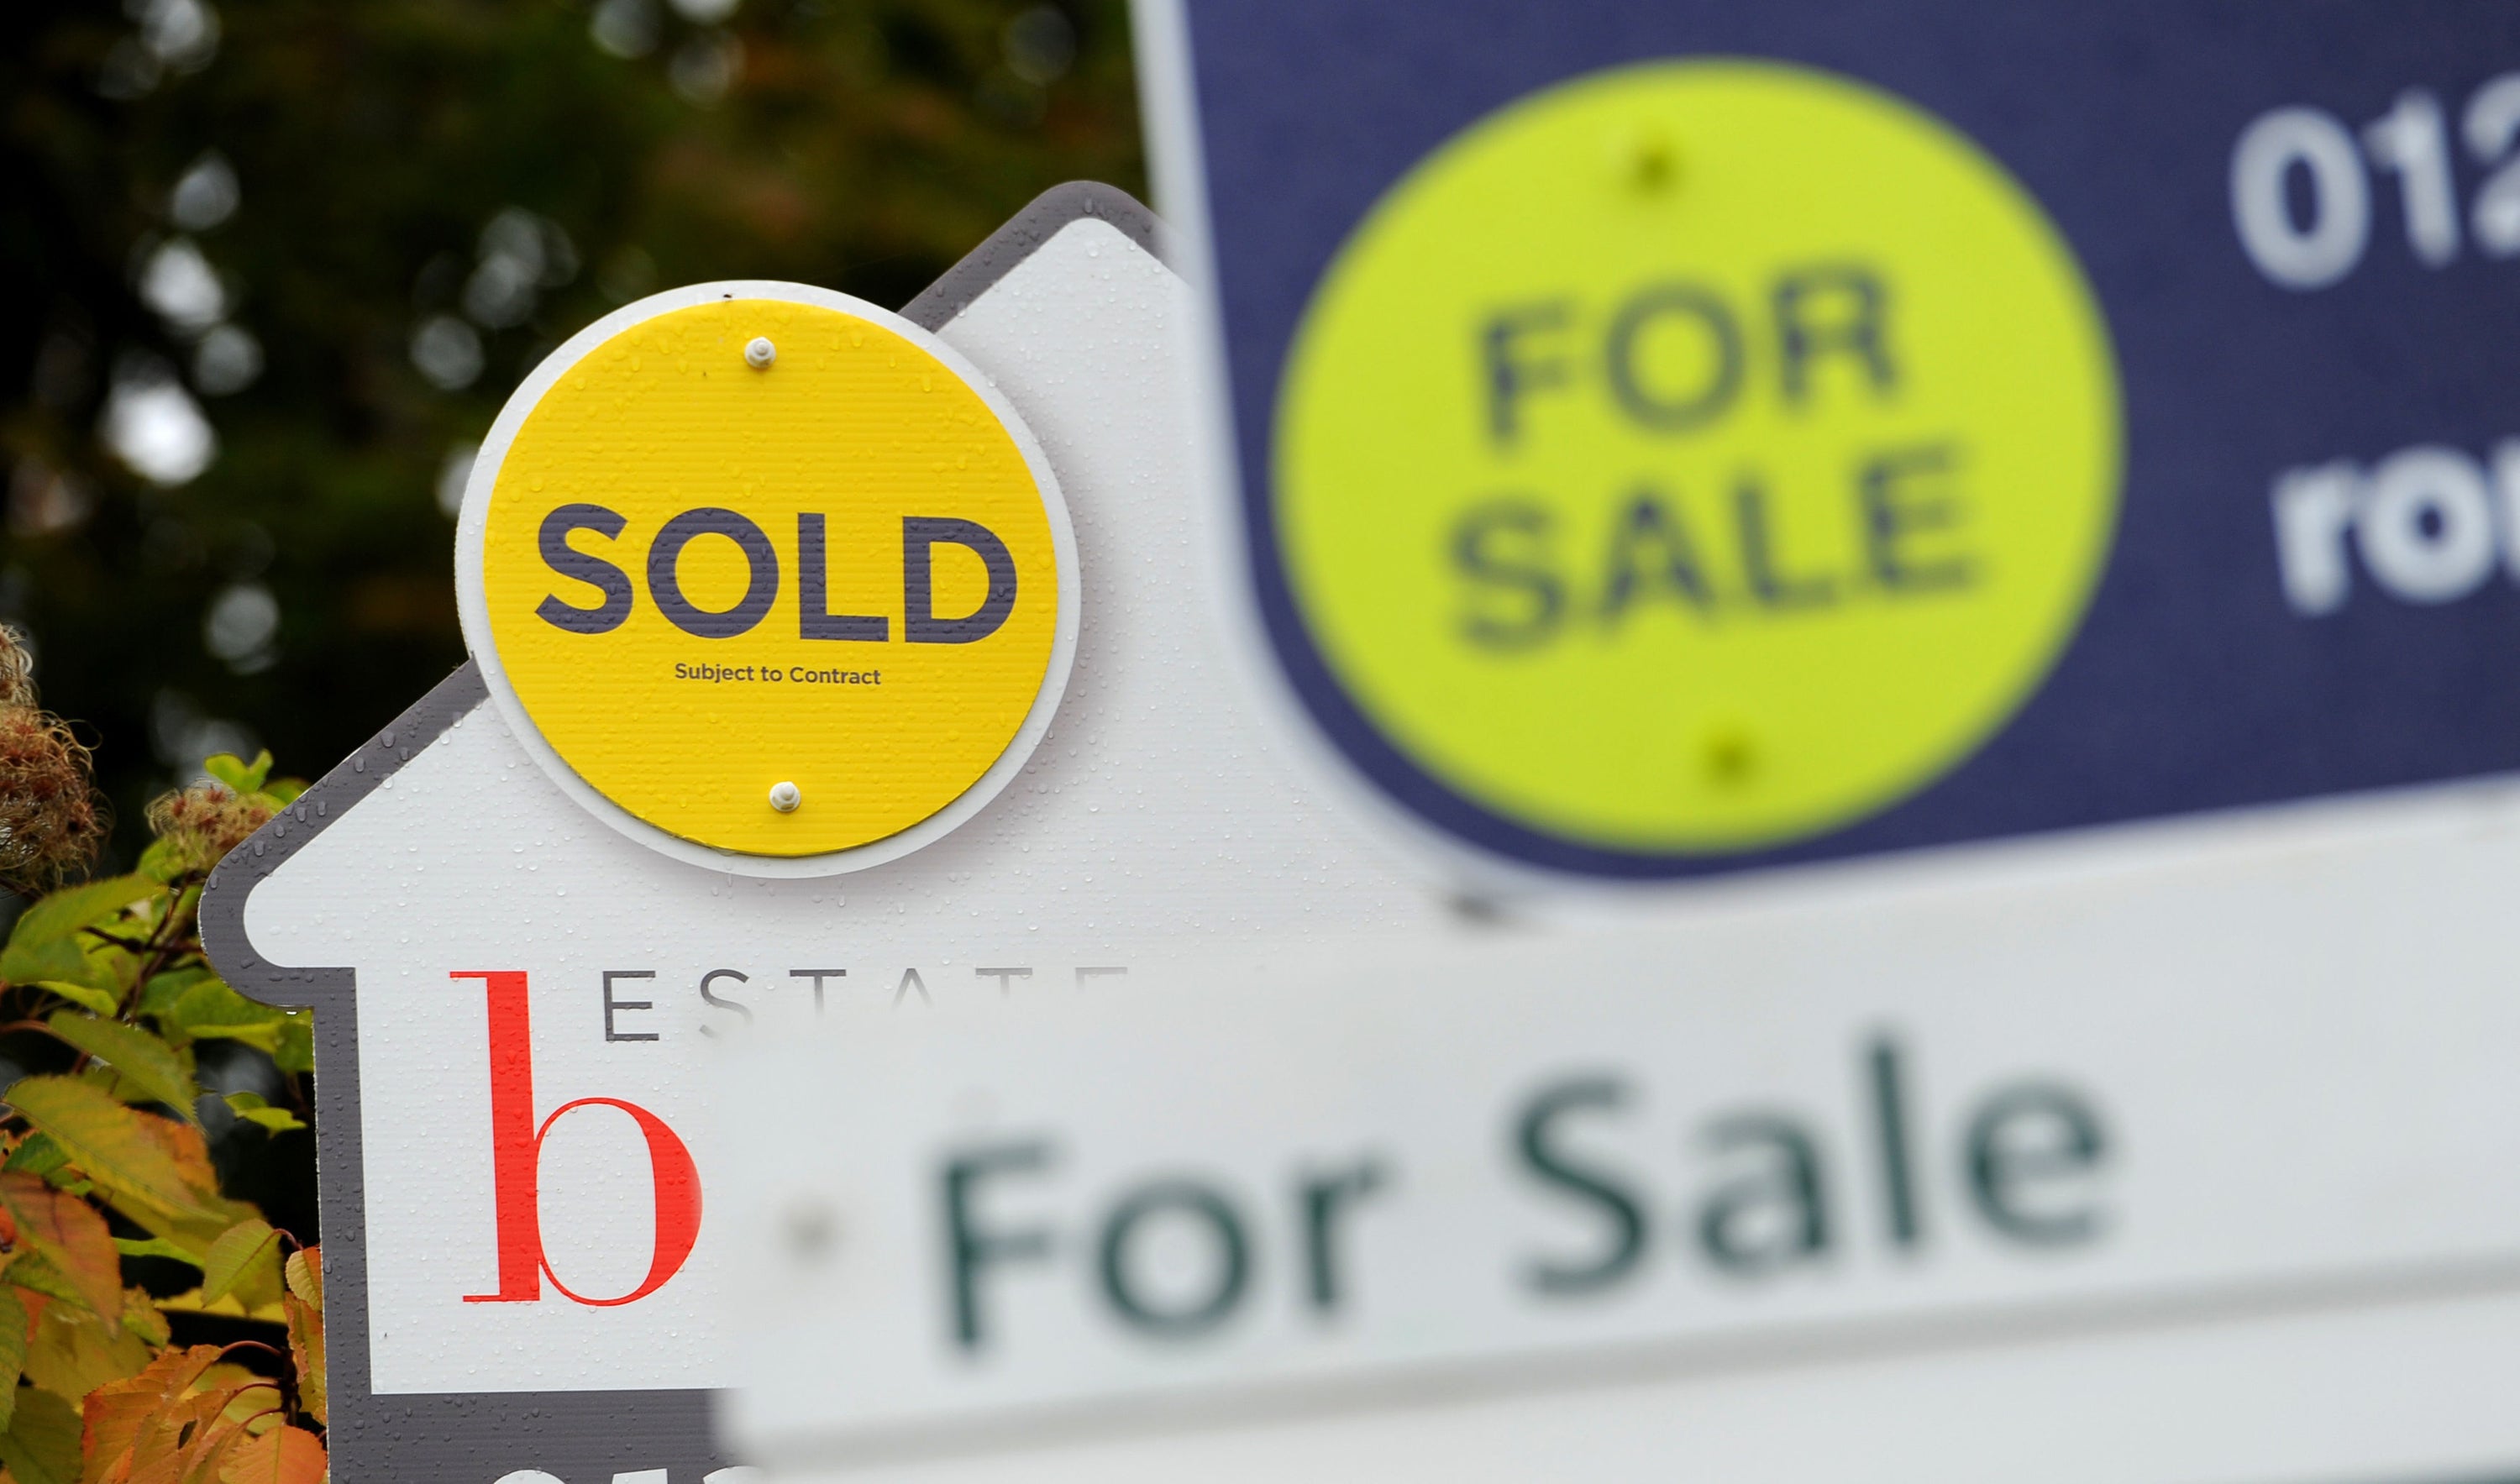 Estate agents' Sold and For Sale boards